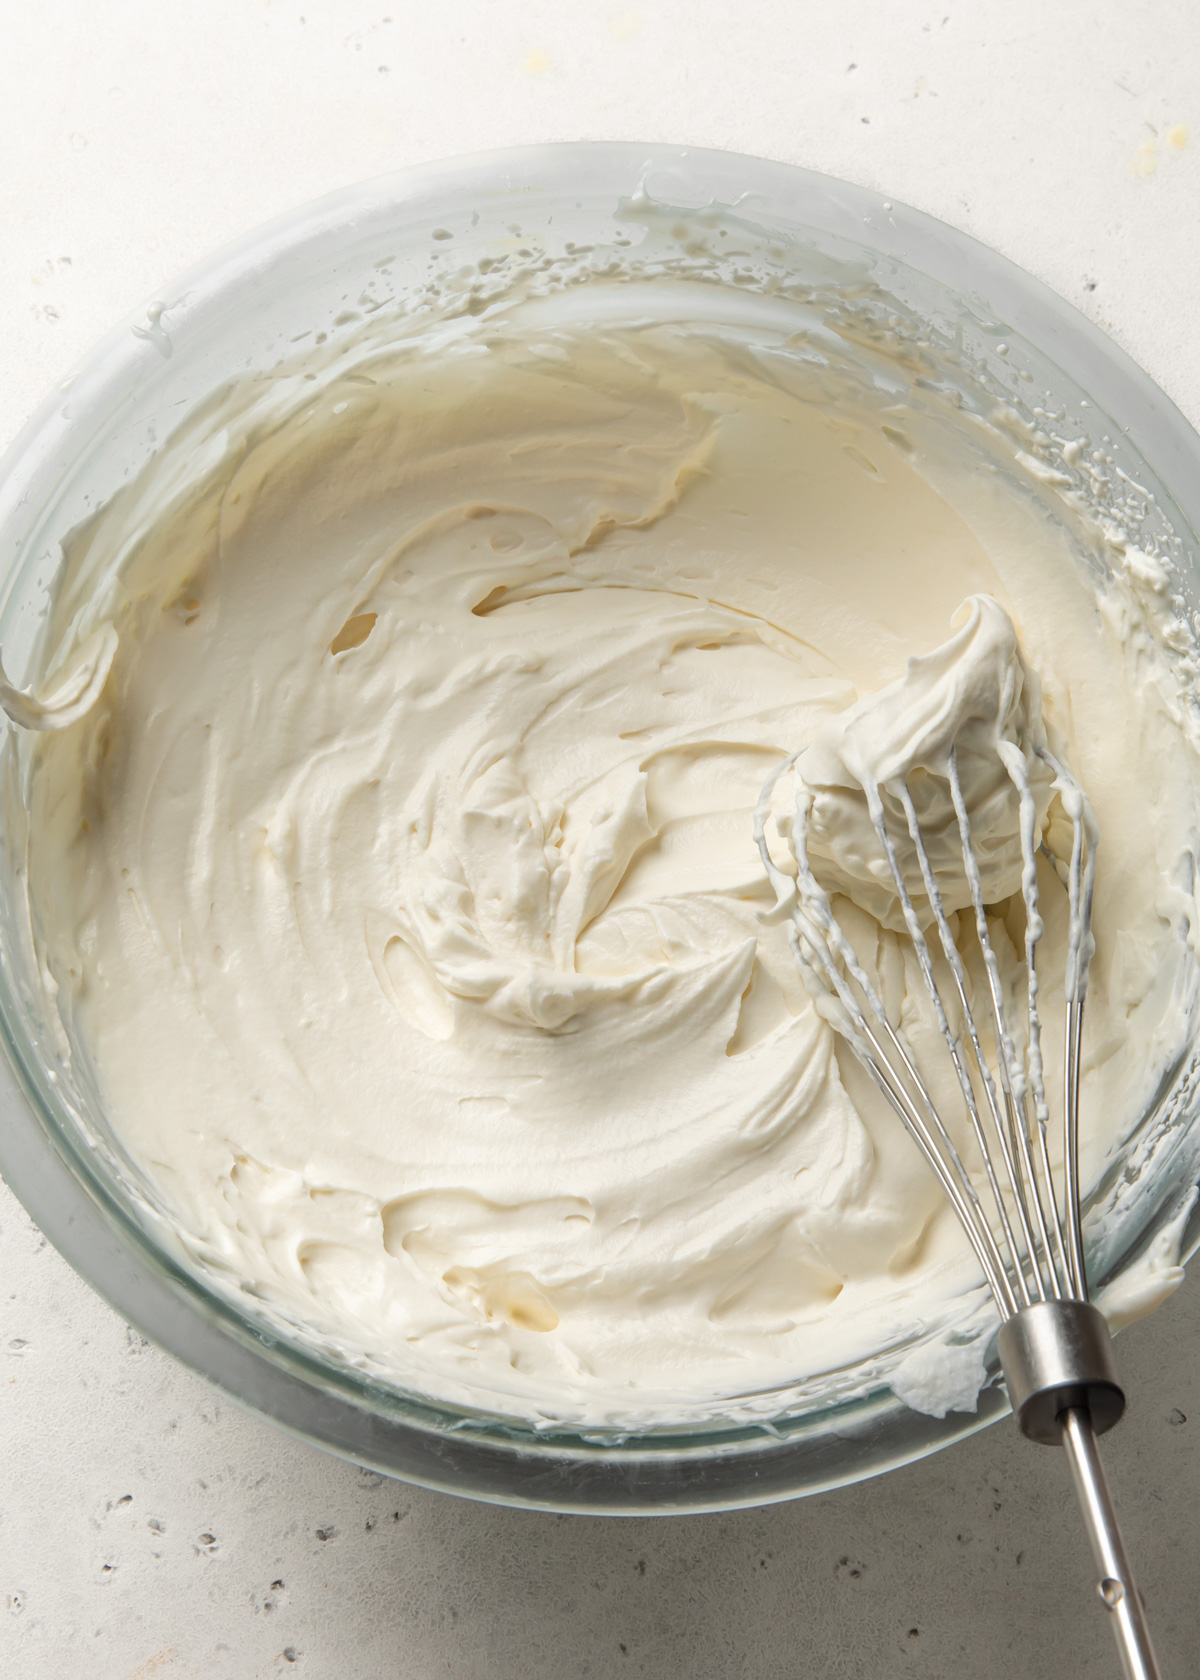 A bowl of stabilized whipped cream with a whisk inside